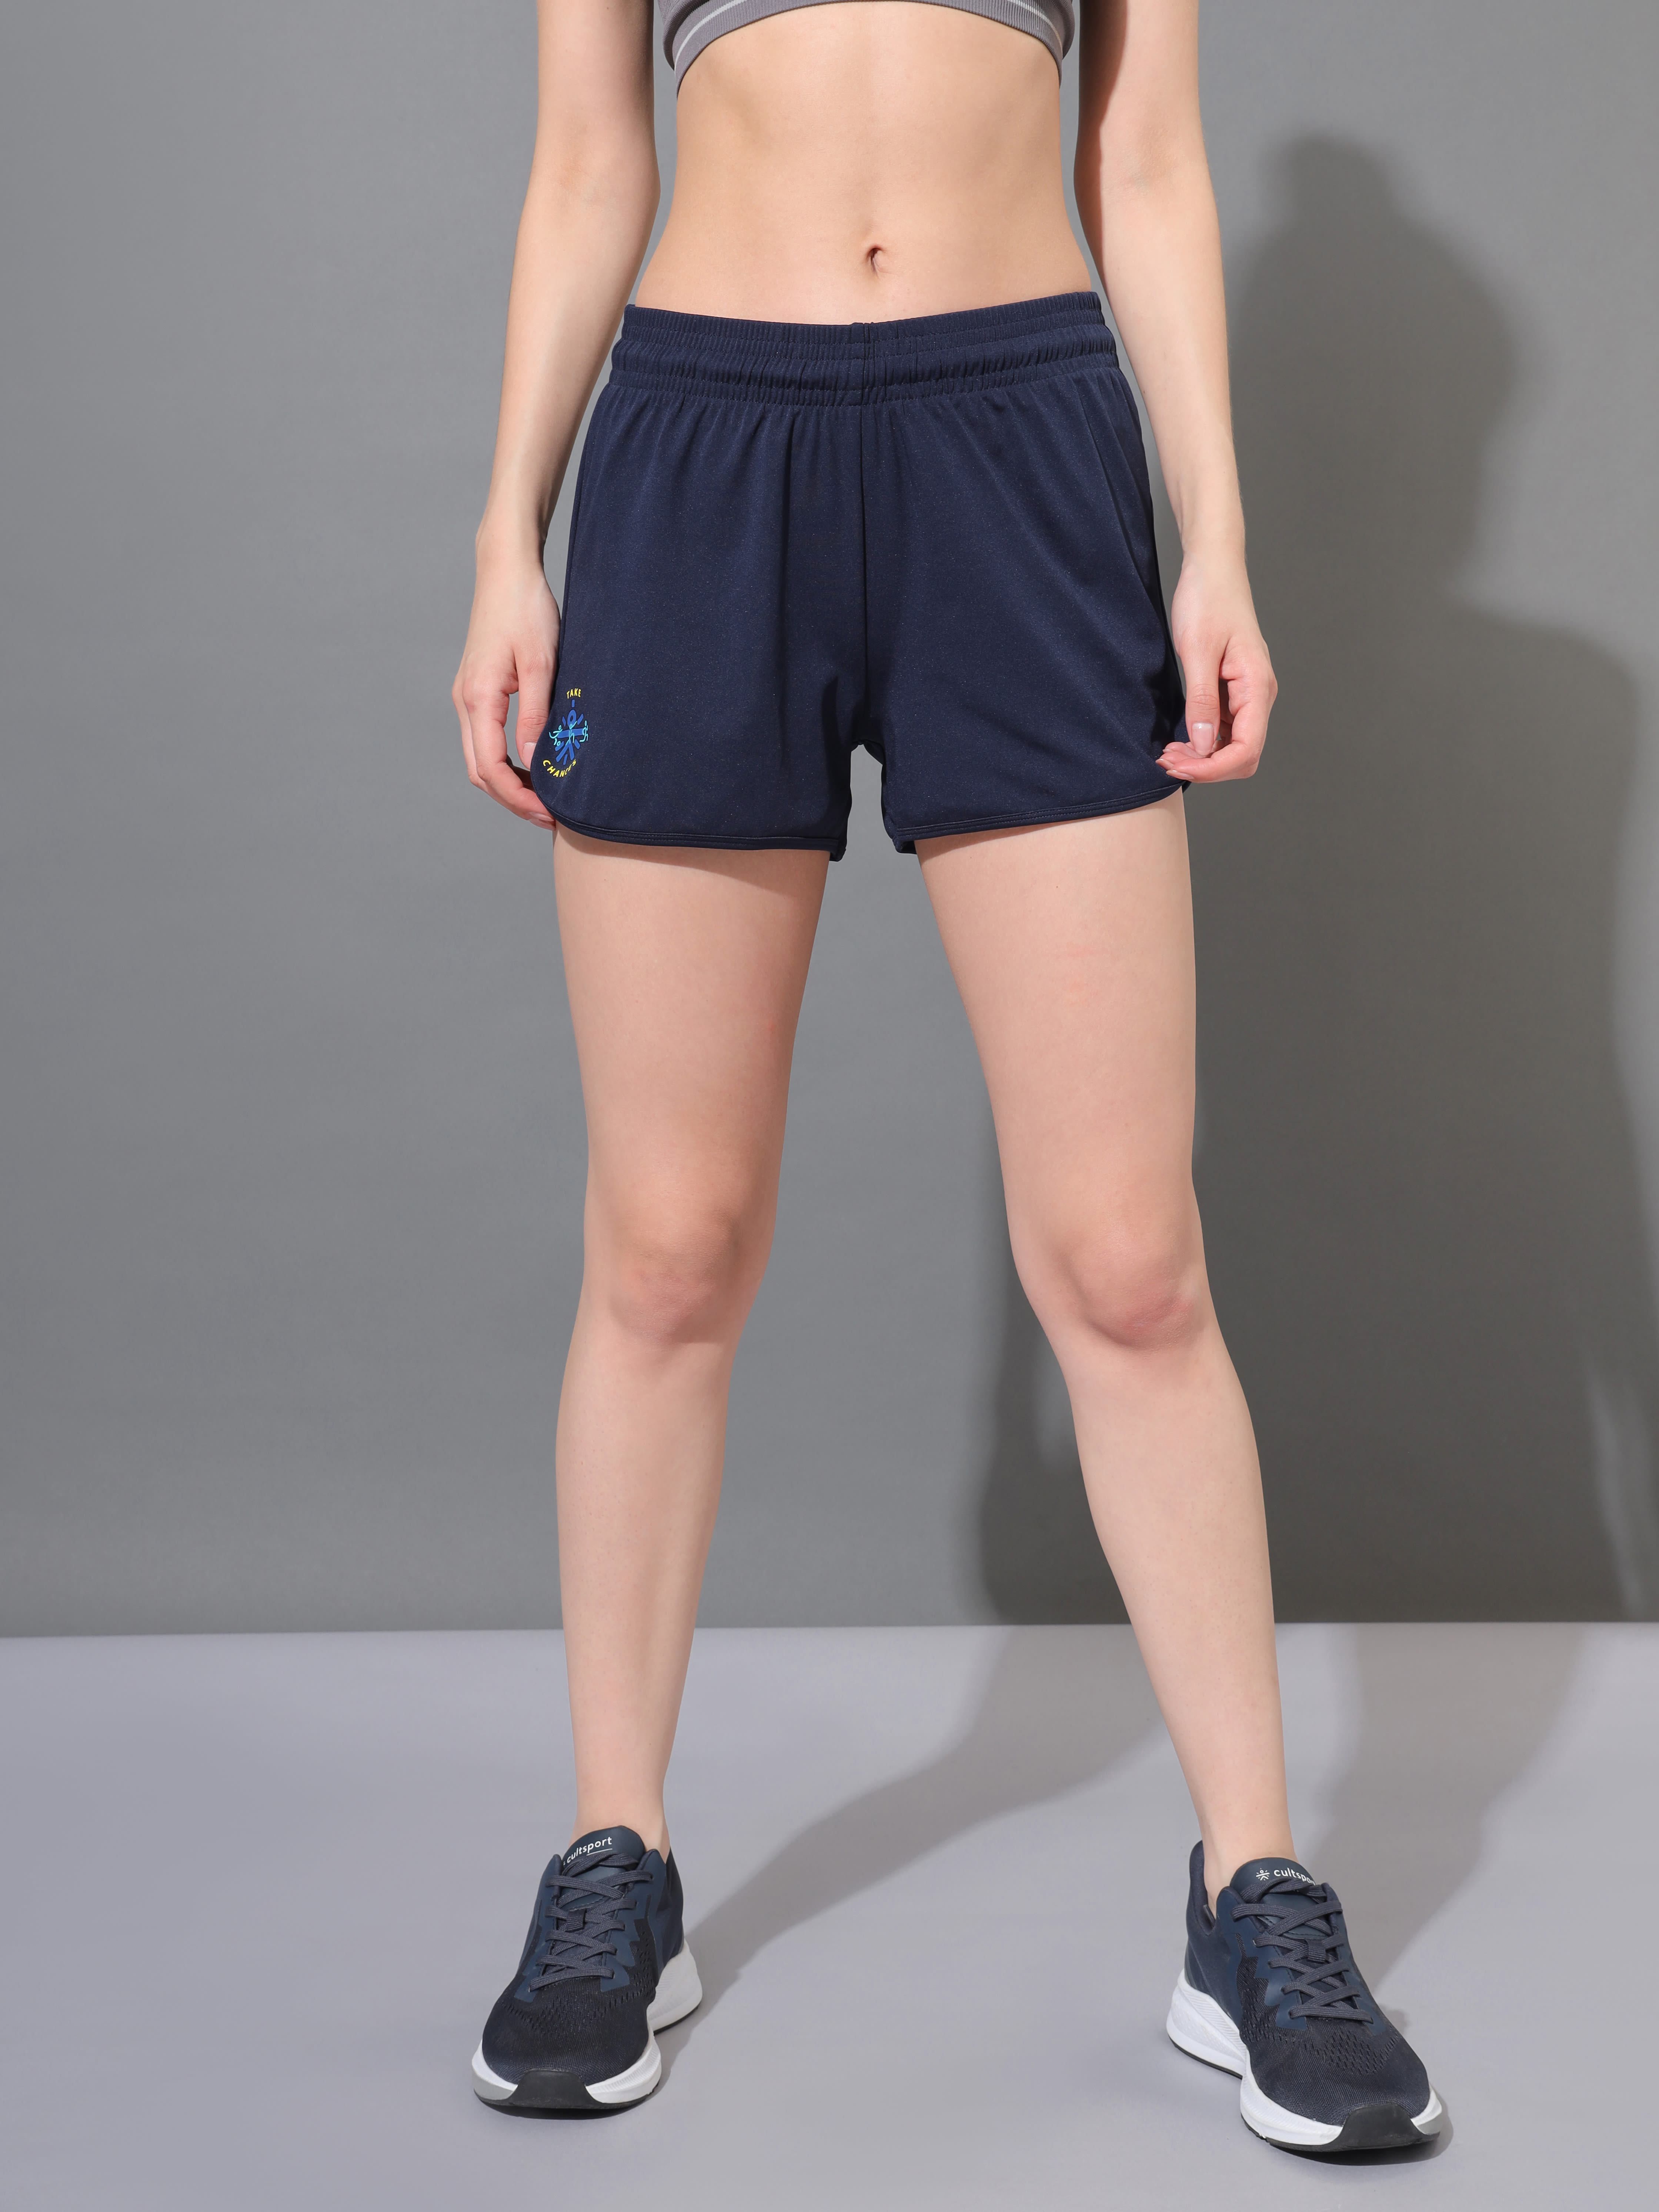 Buy CULTSPORT Running Shorts with Inner Tights | Slip-On | Breathable |  Women's Shorts for Running, Jogging, Gym, Sports (CS702215S_Blue_S) at